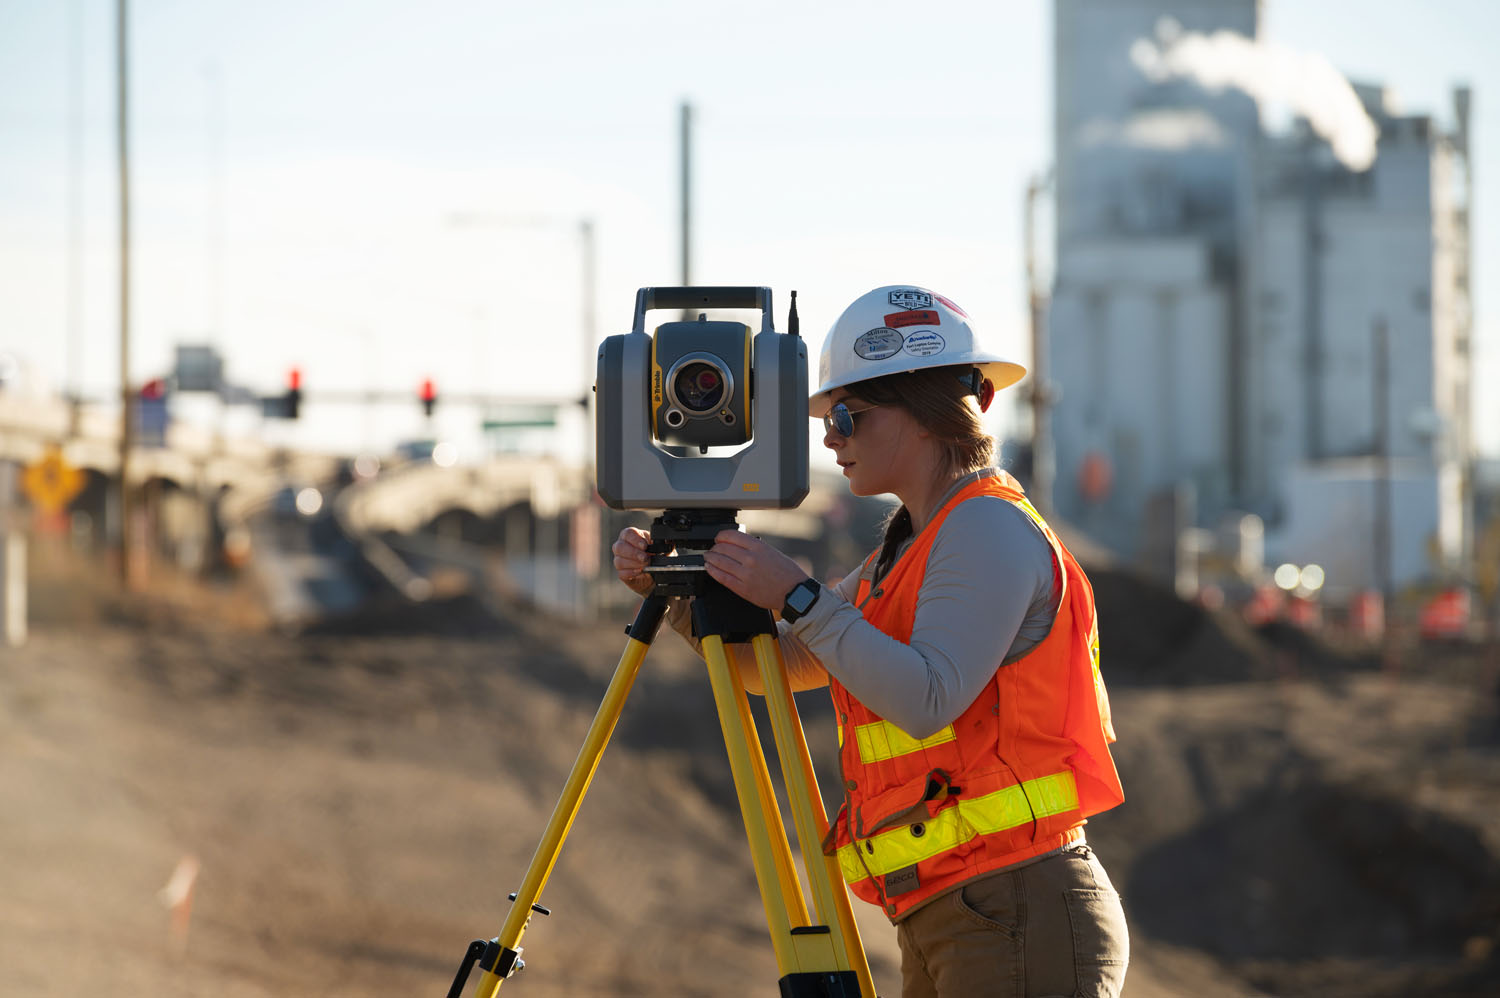 Scanning Total Stations